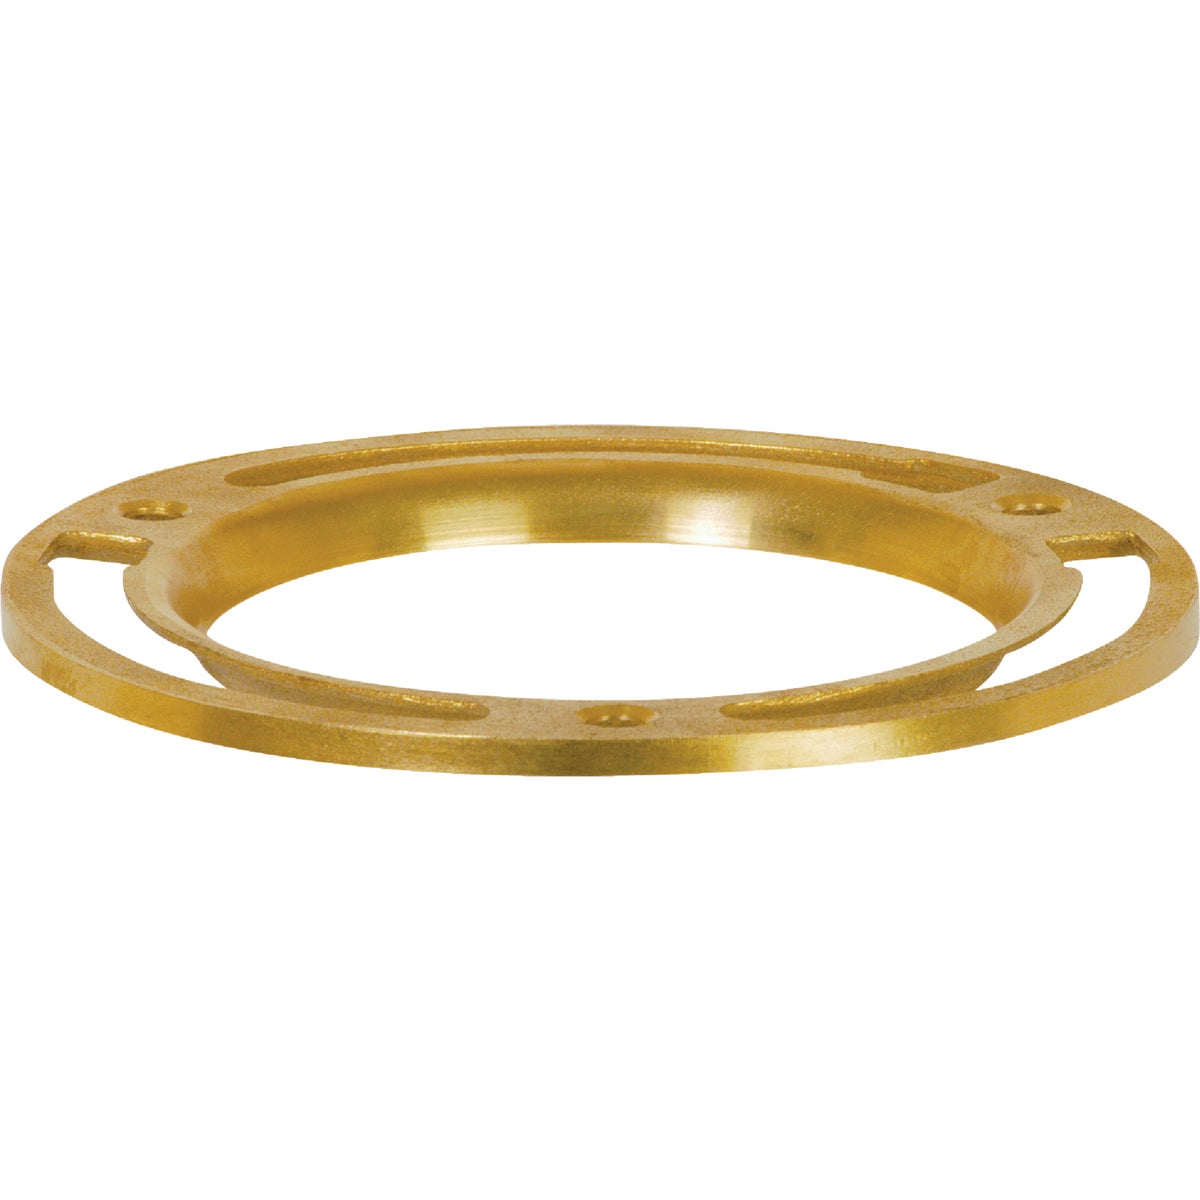 Sioux Chief 4 In. Solid Brass Toilet Flange 